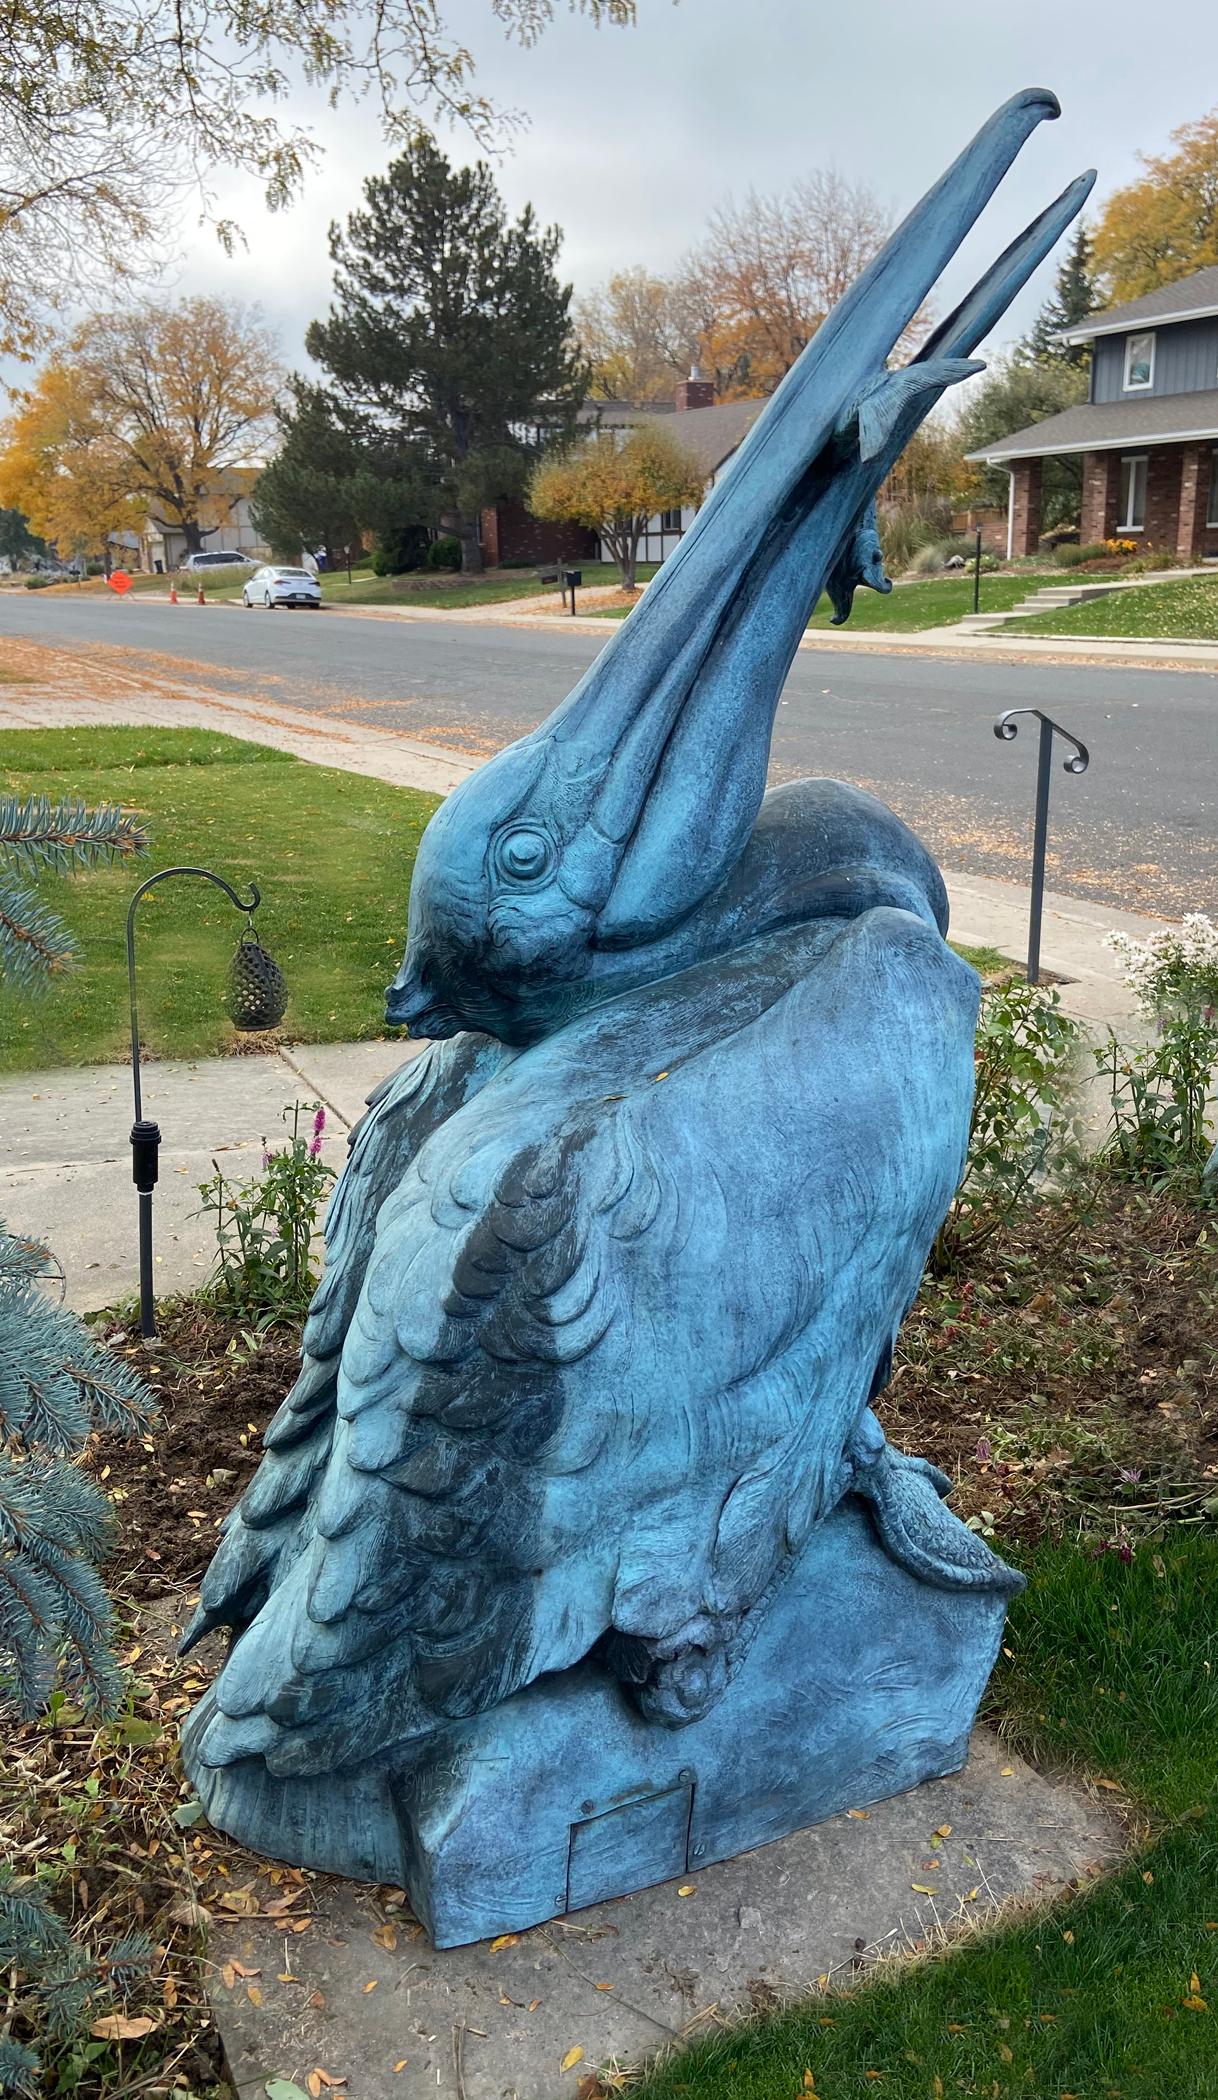 Artful Angler by Sandy Scott
Wildlife Sculpture, Pelican Fountain, blue/green patina
Plumbed as fountain but can also be displayed dry.
76x42x45